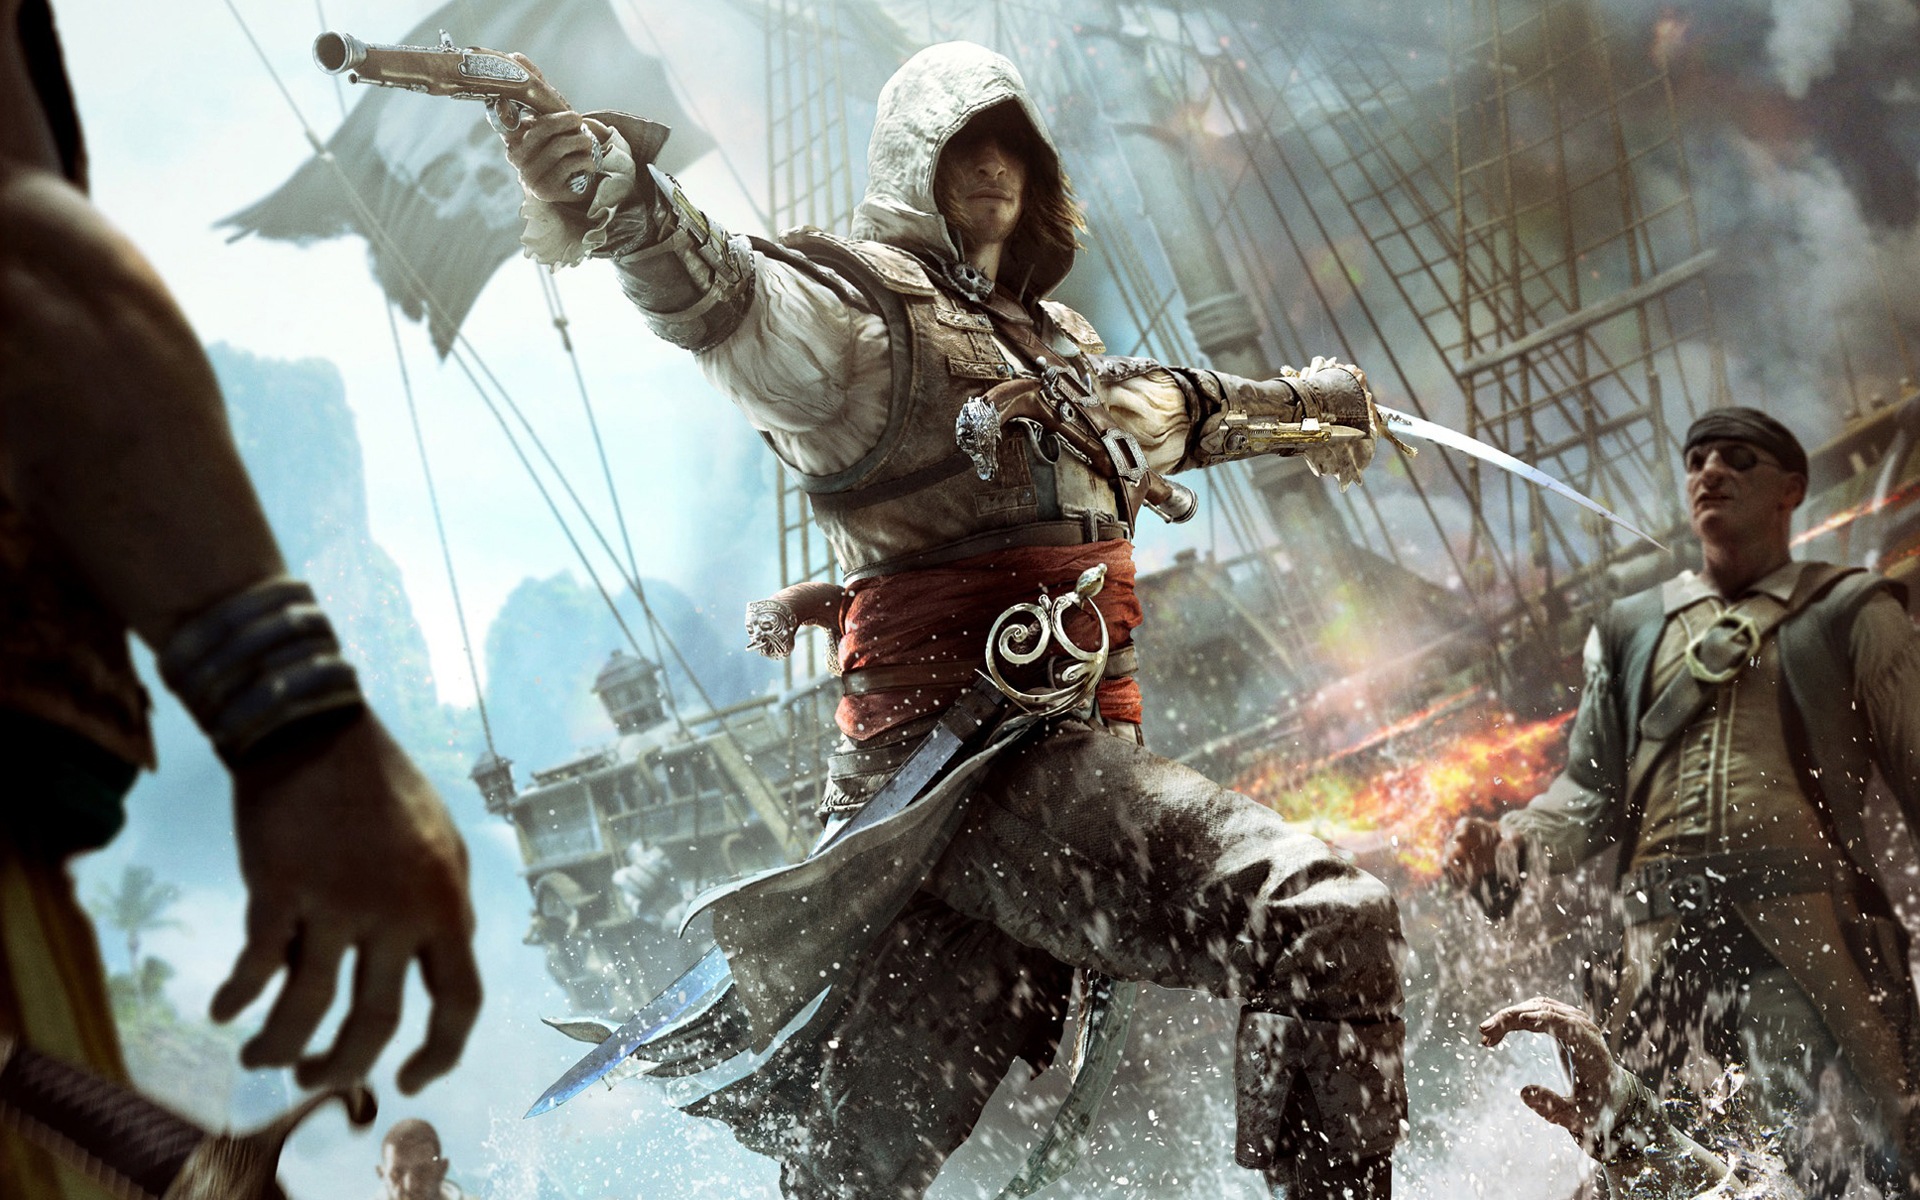 Creed IV Assassin: Black Flag HD wallpapers #6 - 1920x1200